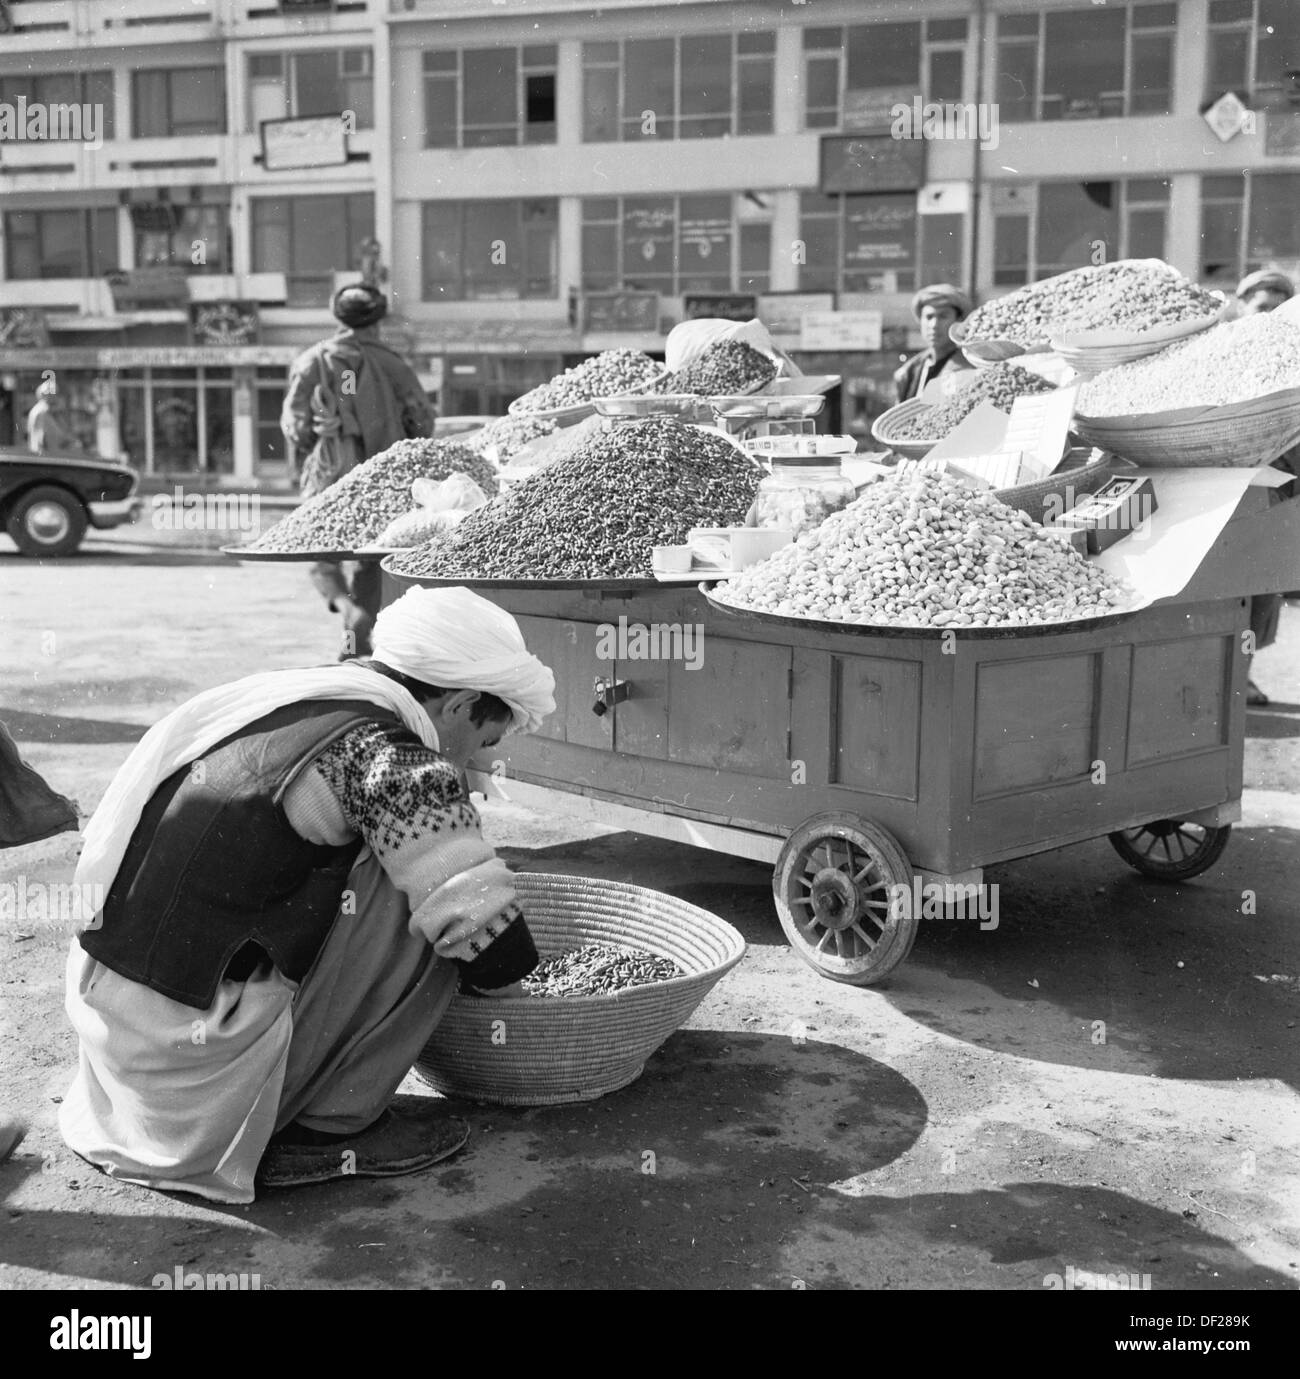 Historical picture from1950s by J Allan Cash showing an Afghan street trader in Kabul, Afghanistan preparing food for his stall. Stock Photo